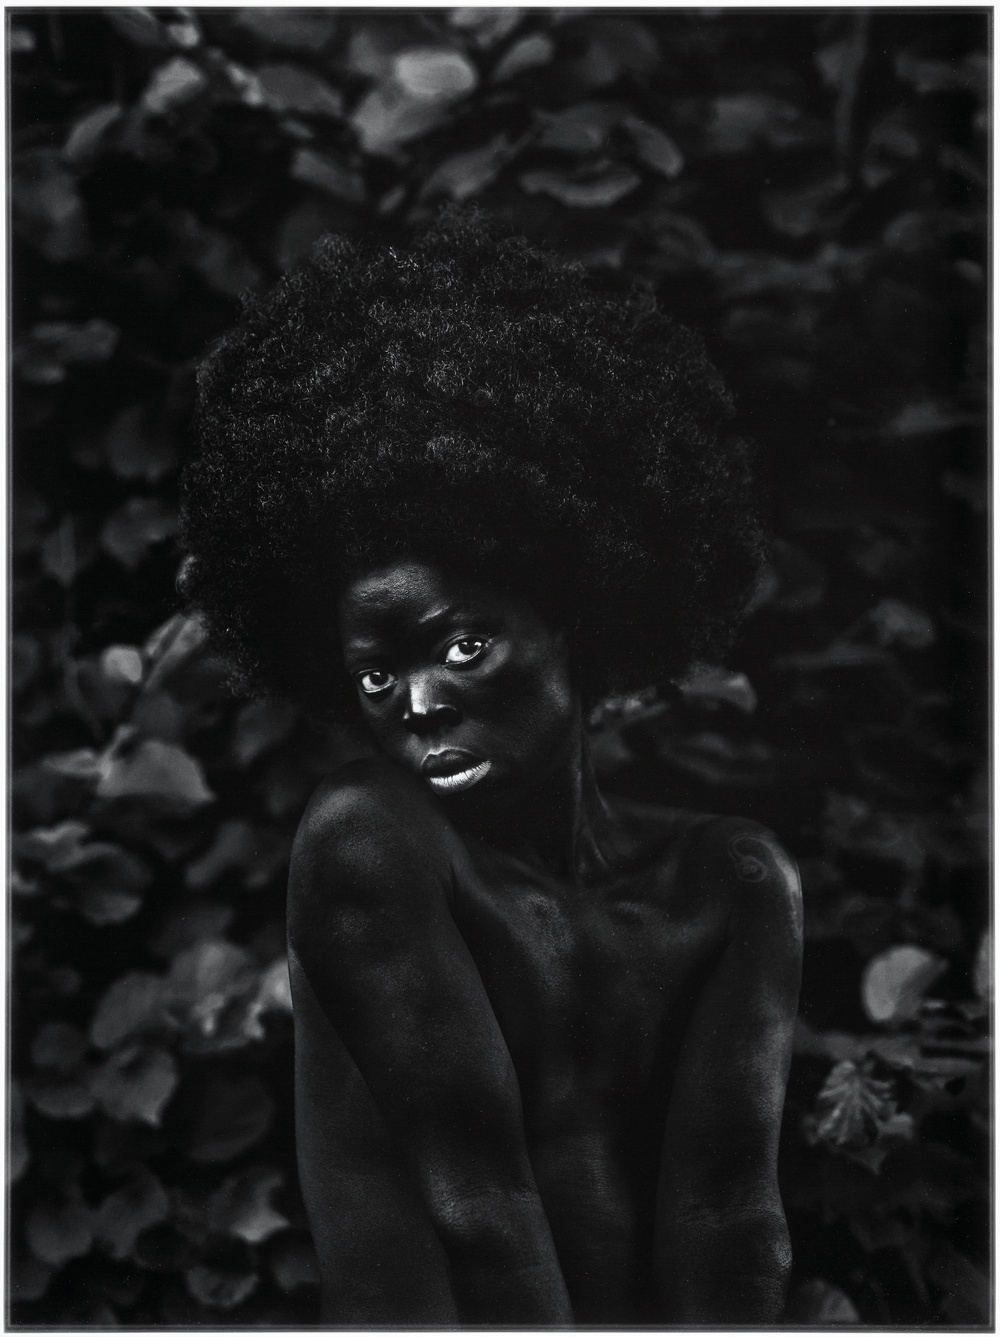 Black and white photograph of a person in the nude looking intensely at the camera and whose dark skin is emphasized.